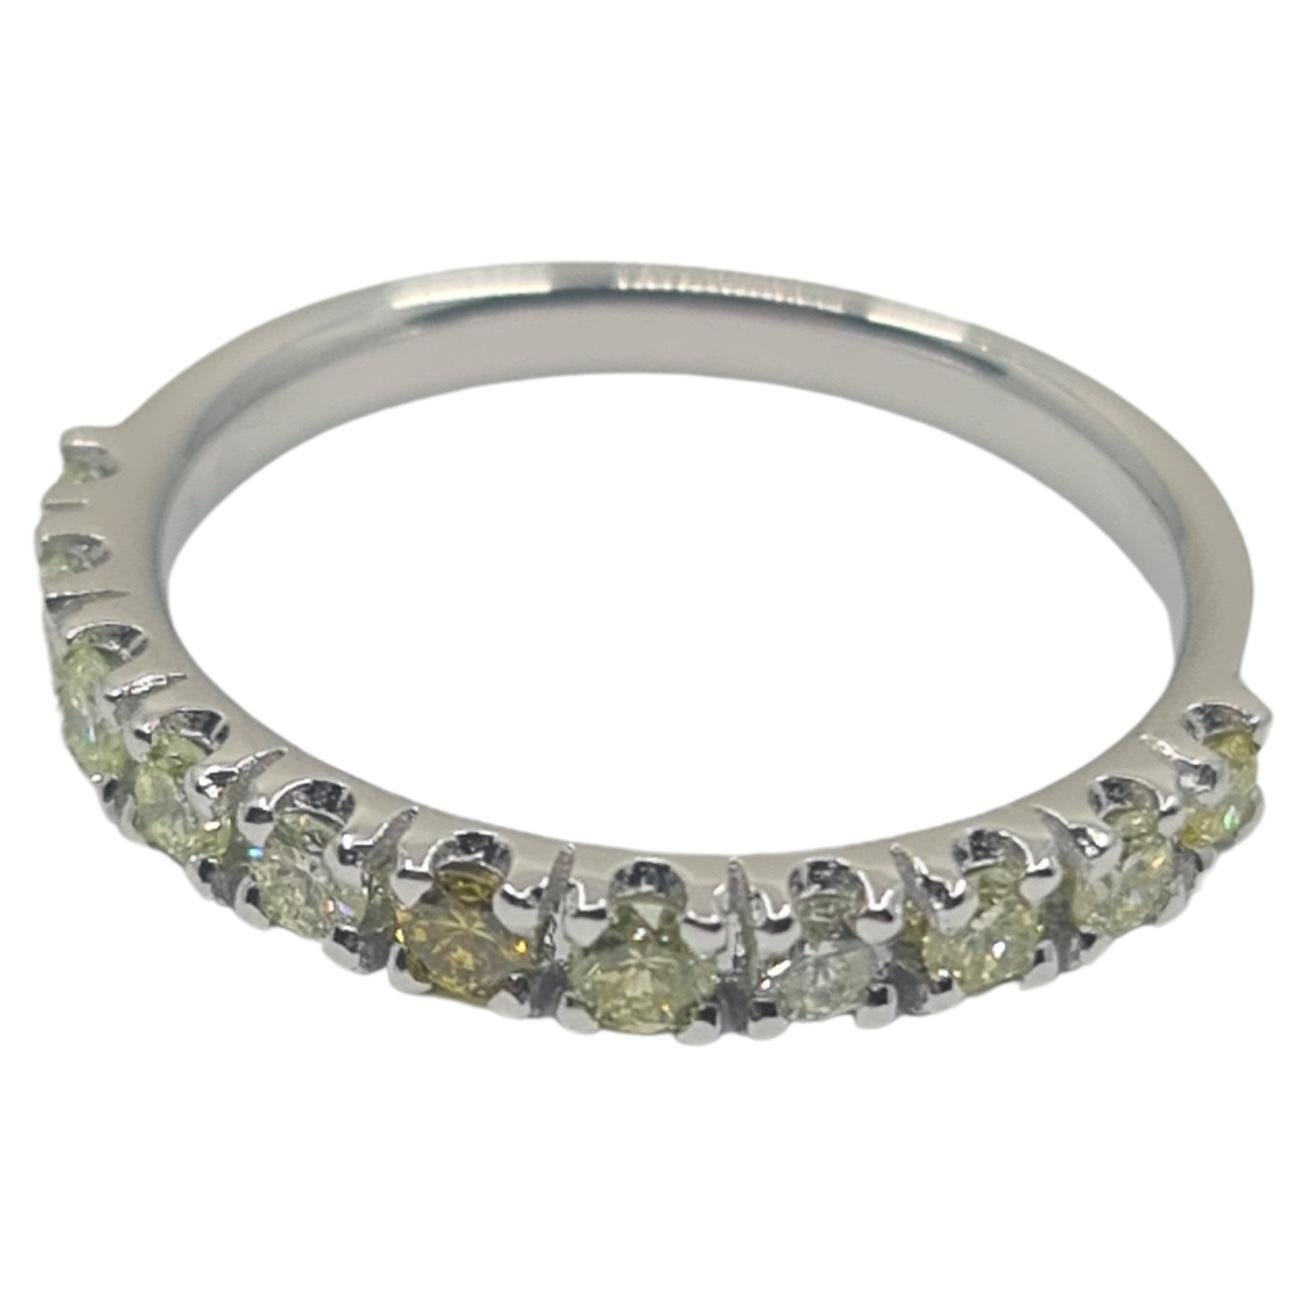 Exquisite Alliance Diamond Ring with 0.57 Carat Fancy Green Brilliants  For Sale